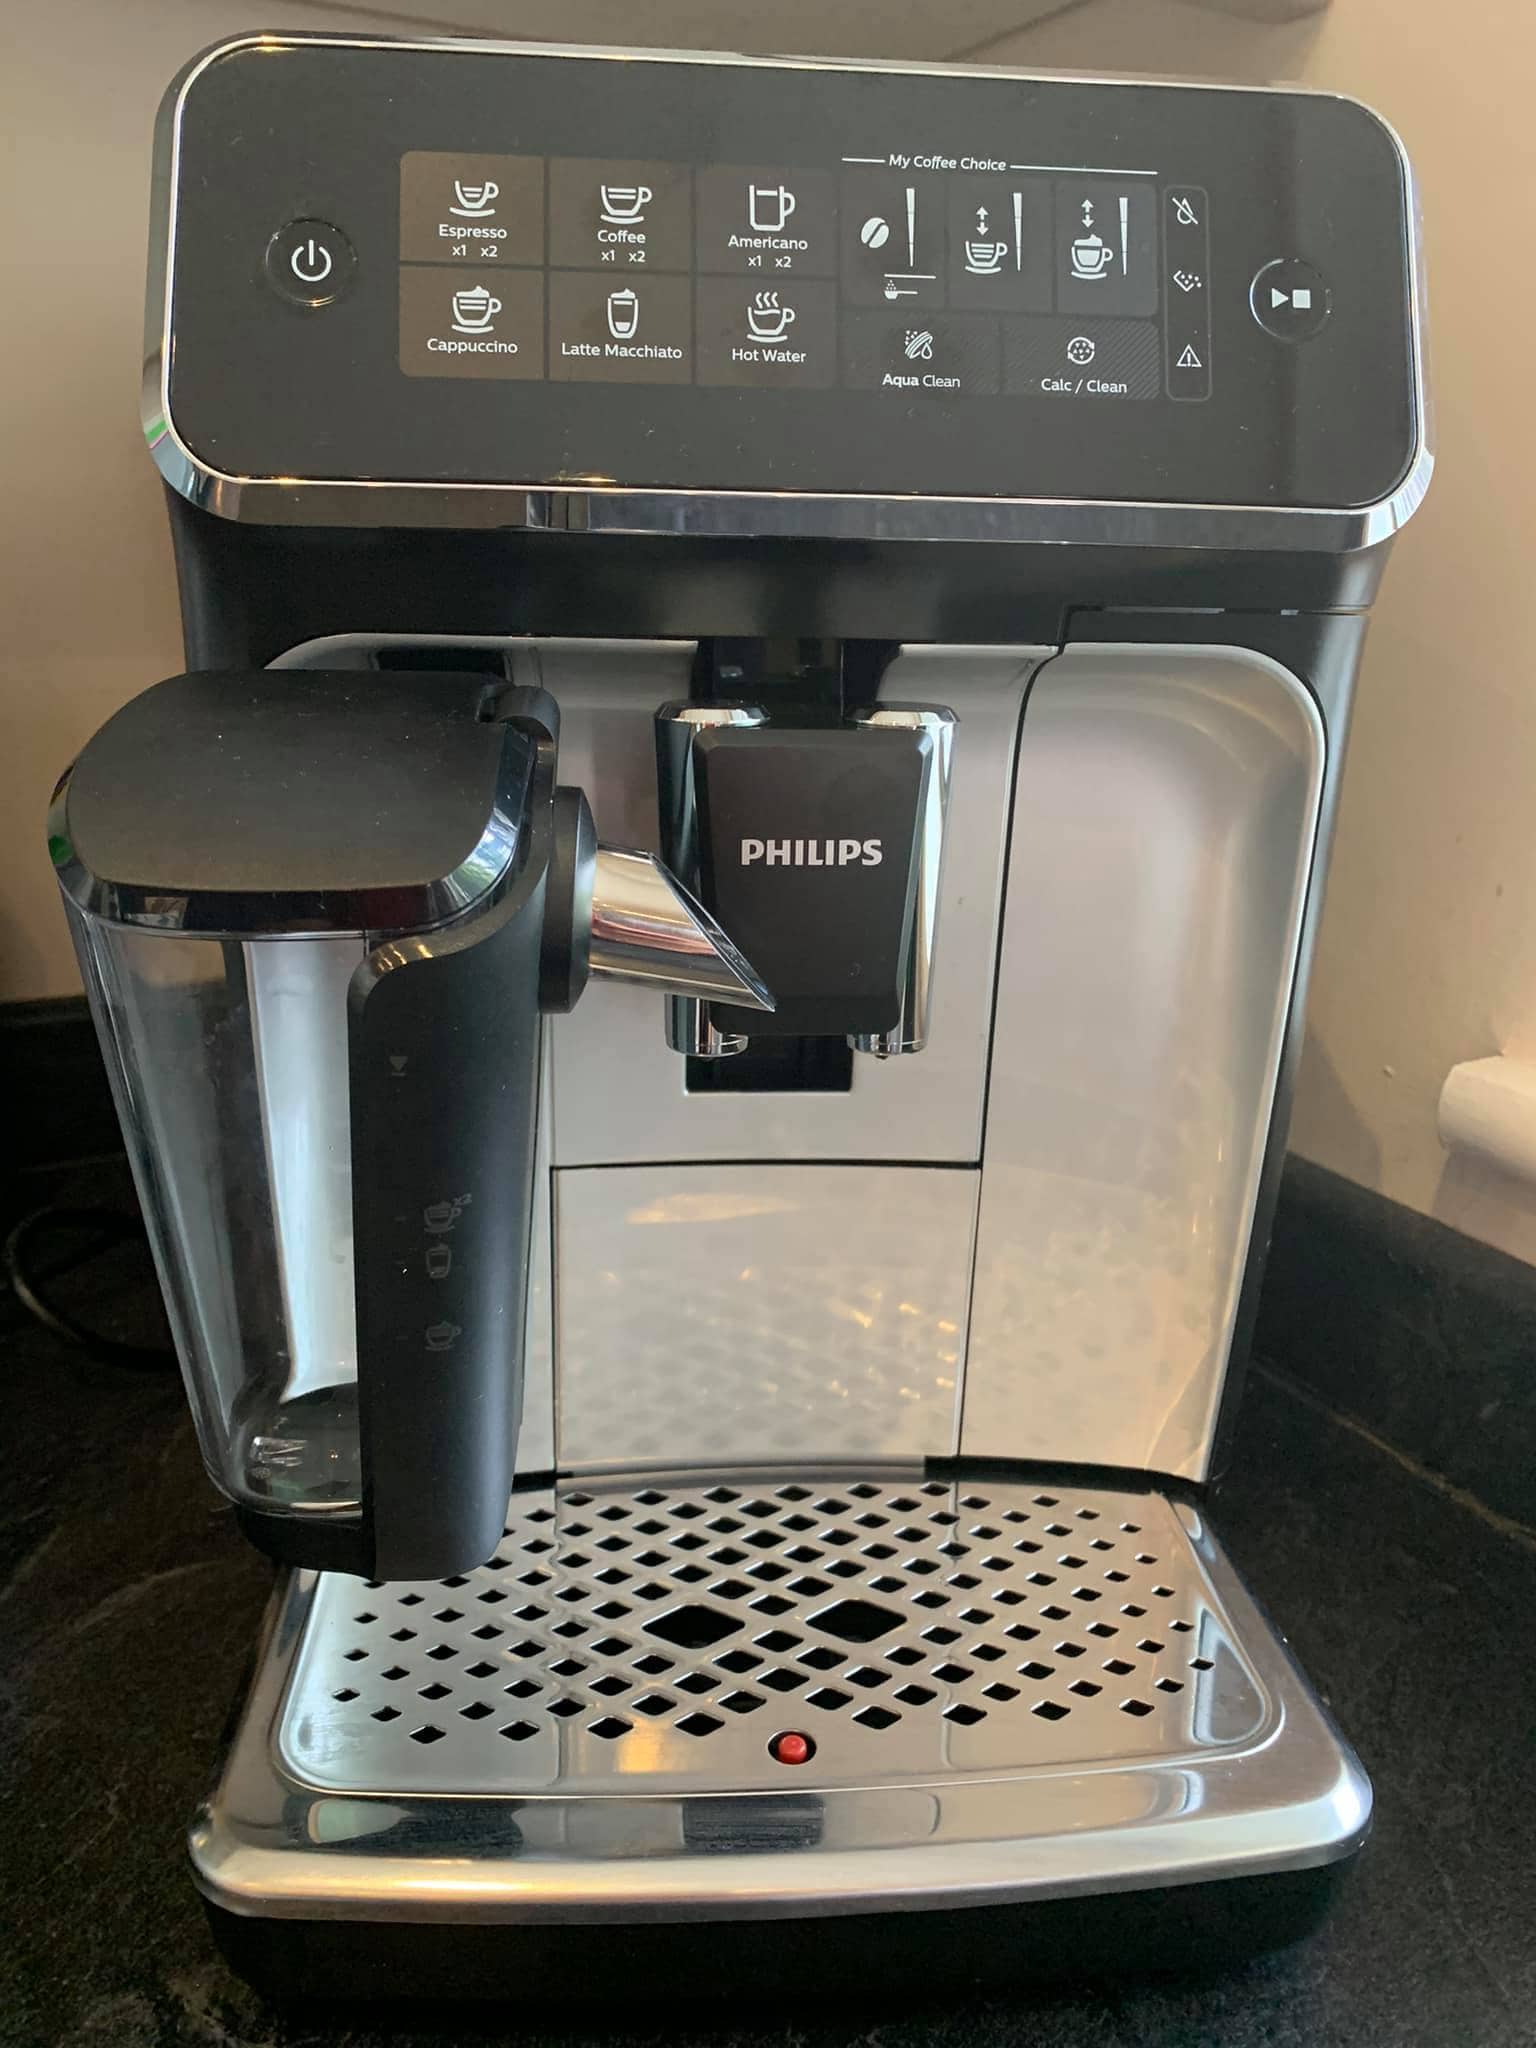 Philips 3200 Lattego is easy to clean